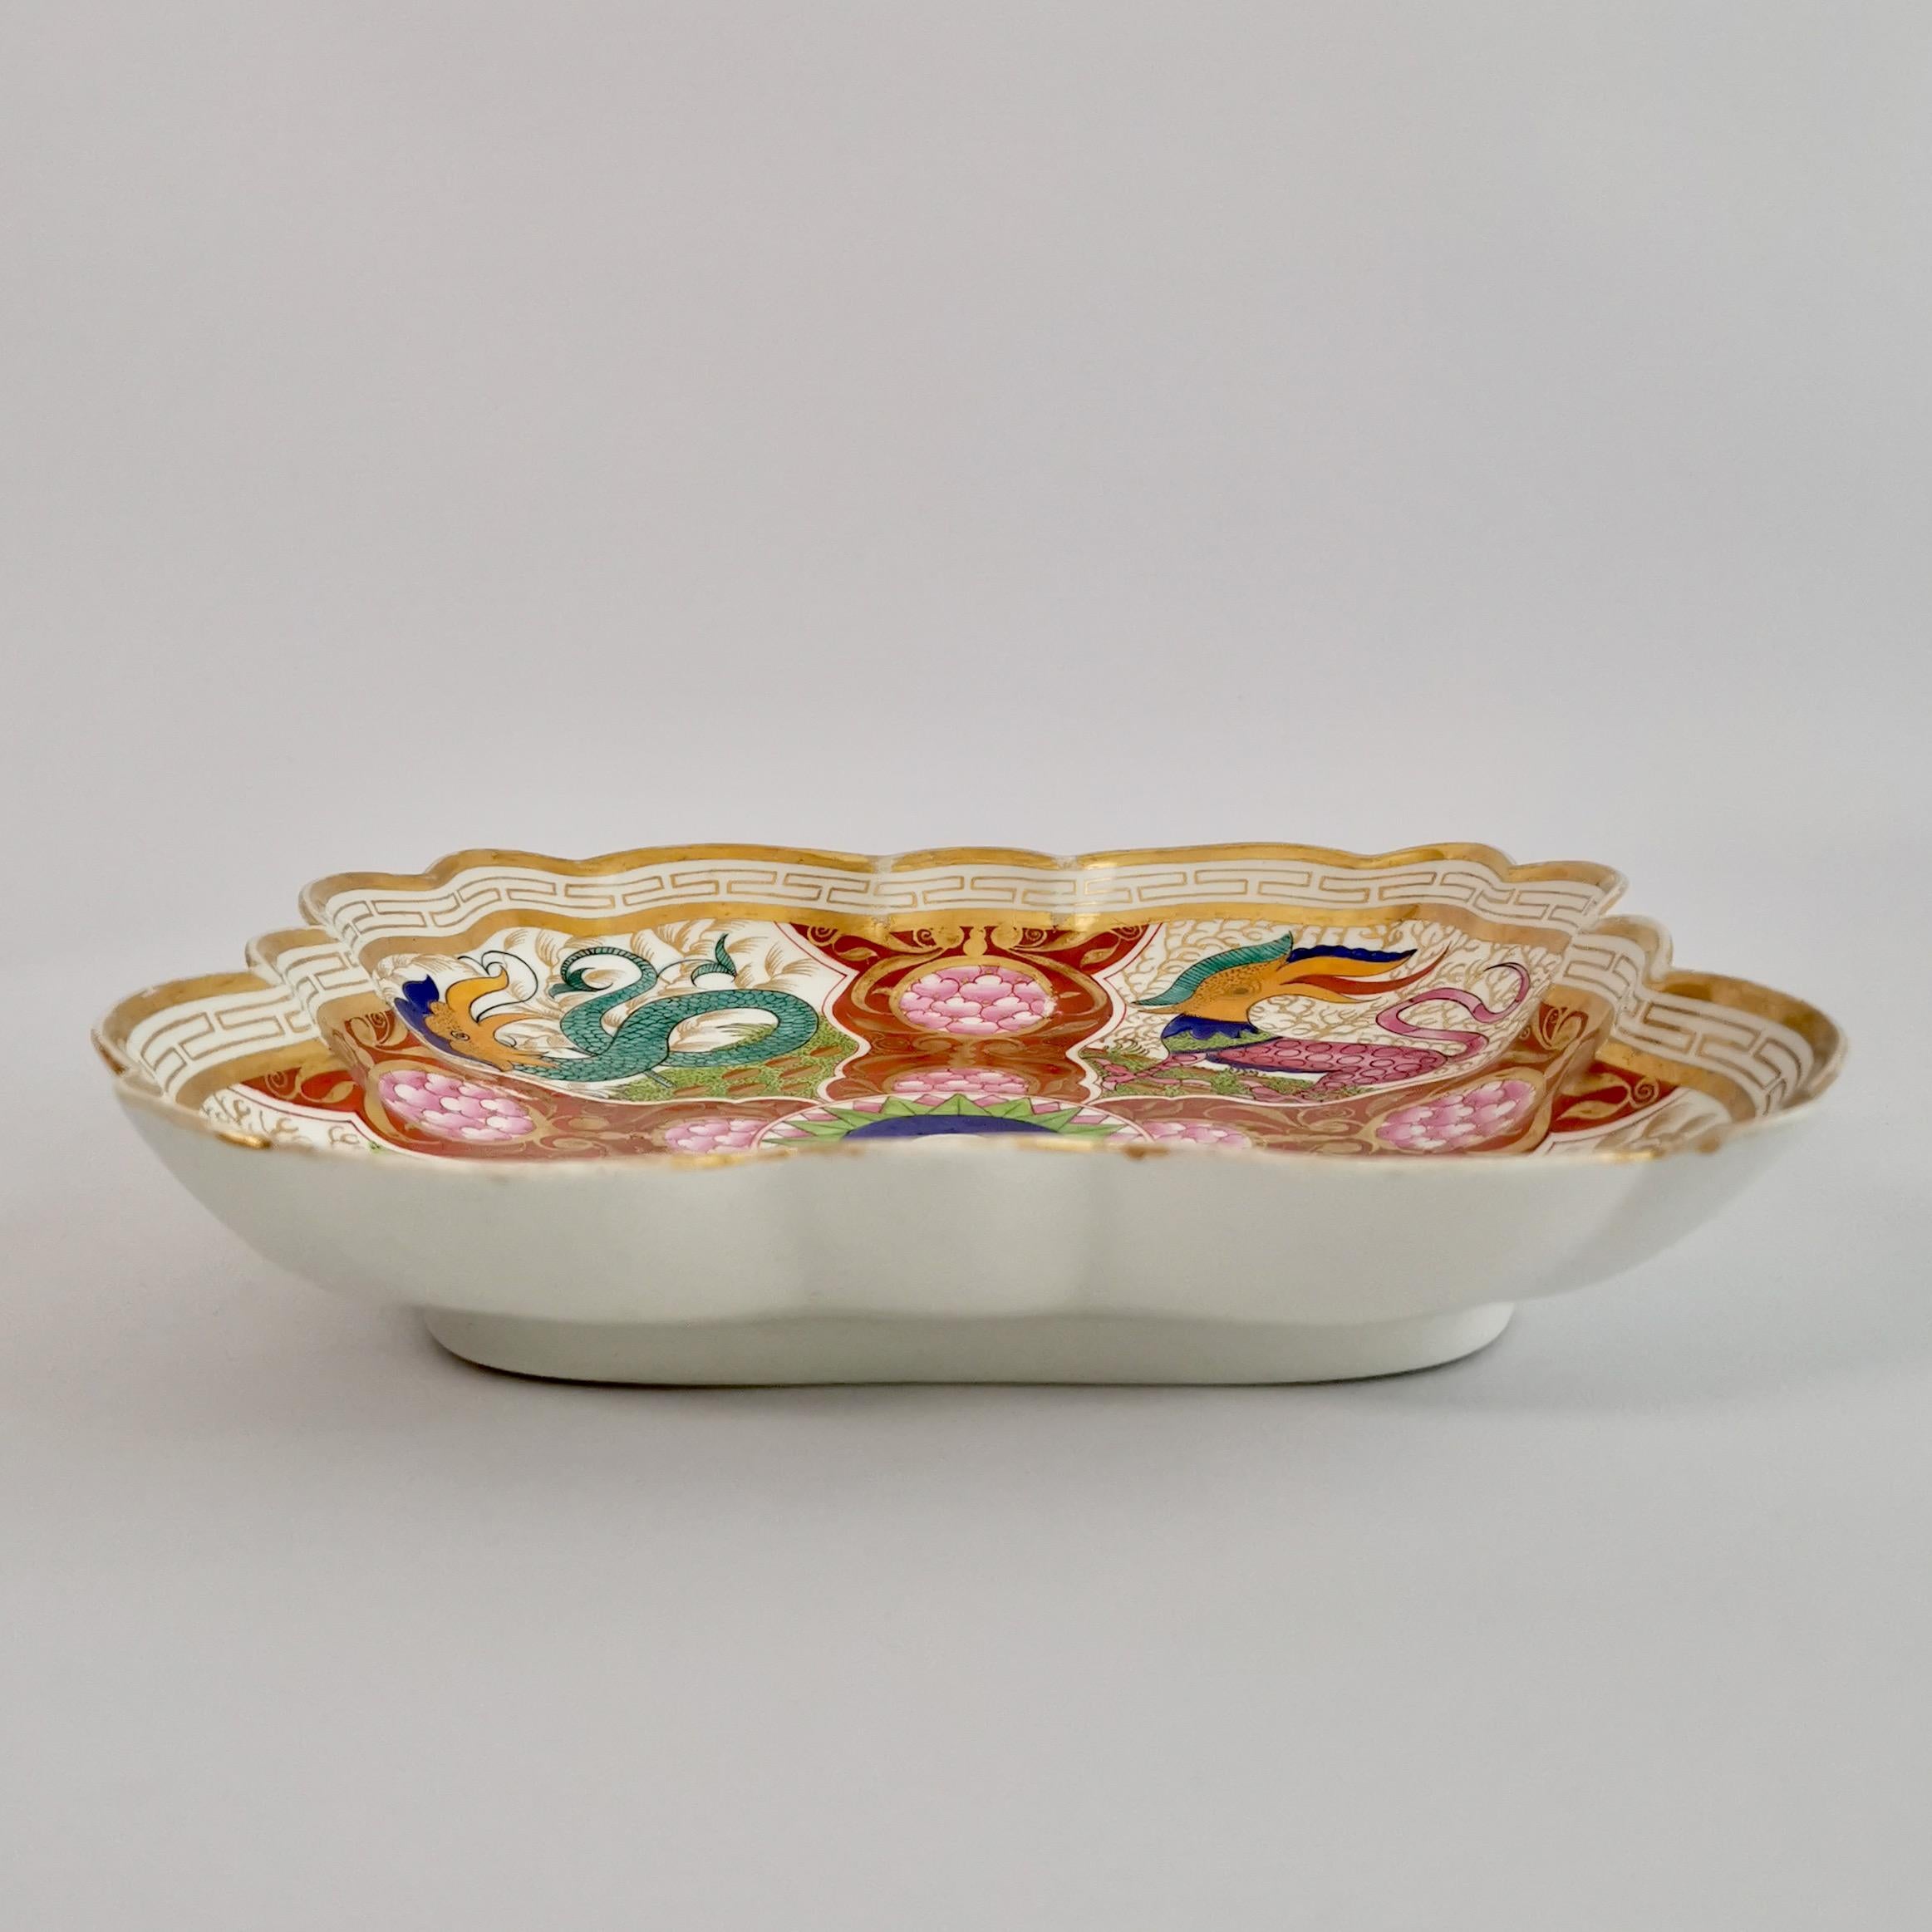 Square Porcelain Dish, Barr Flight & Barr, Dragons in Compartments, 1807-1813 5